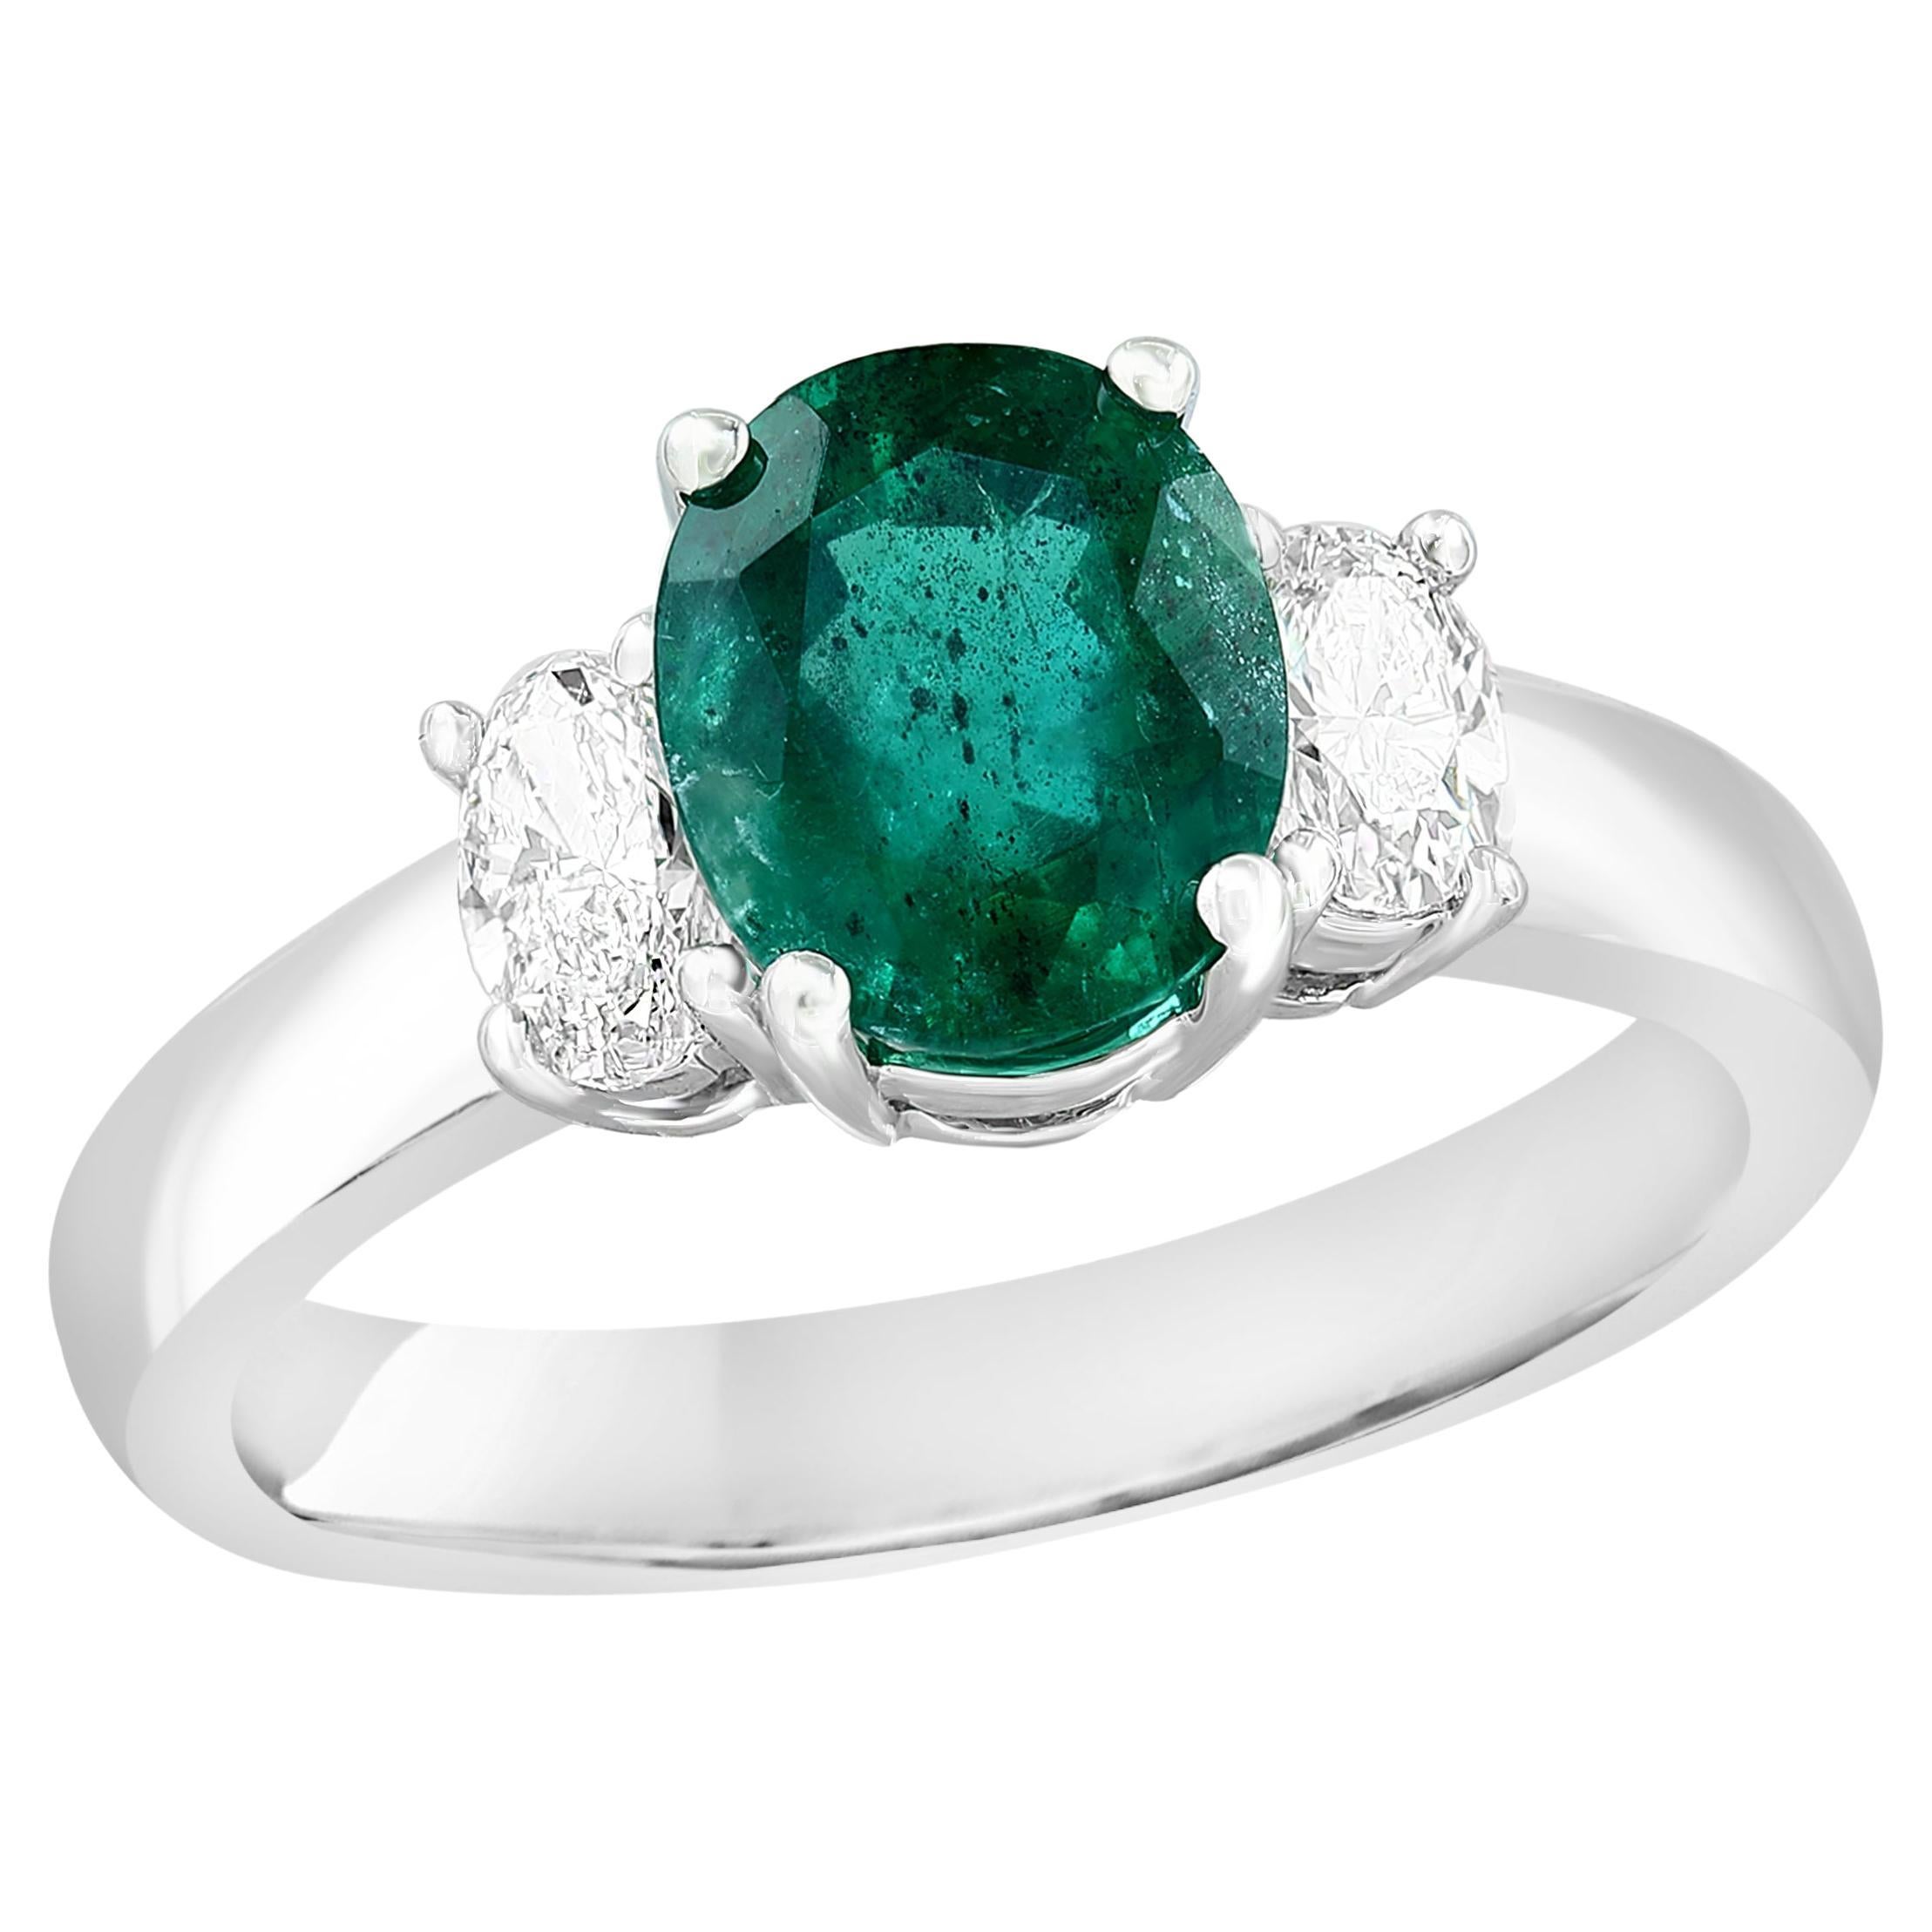 1.97 Carat Oval Cut Emerald & Diamond 3 Stone Engagement Ring in 18k White Gold For Sale